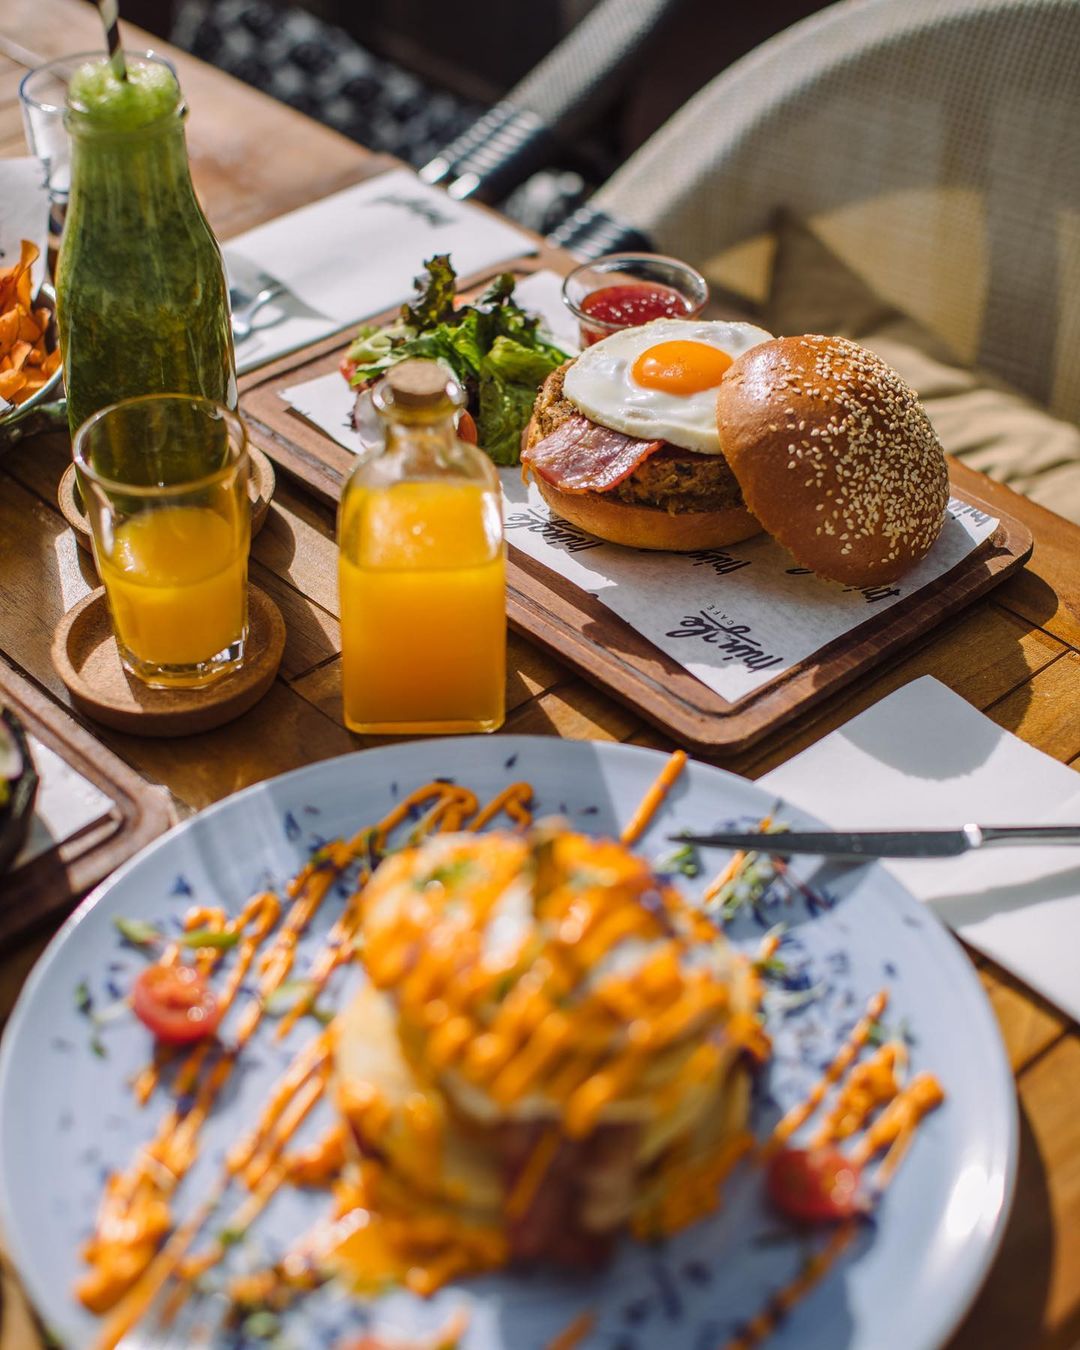 Irezistible brunch with burger, potatoes and orange juice at Mingle Cafe - Best Restaurants in Cyprus